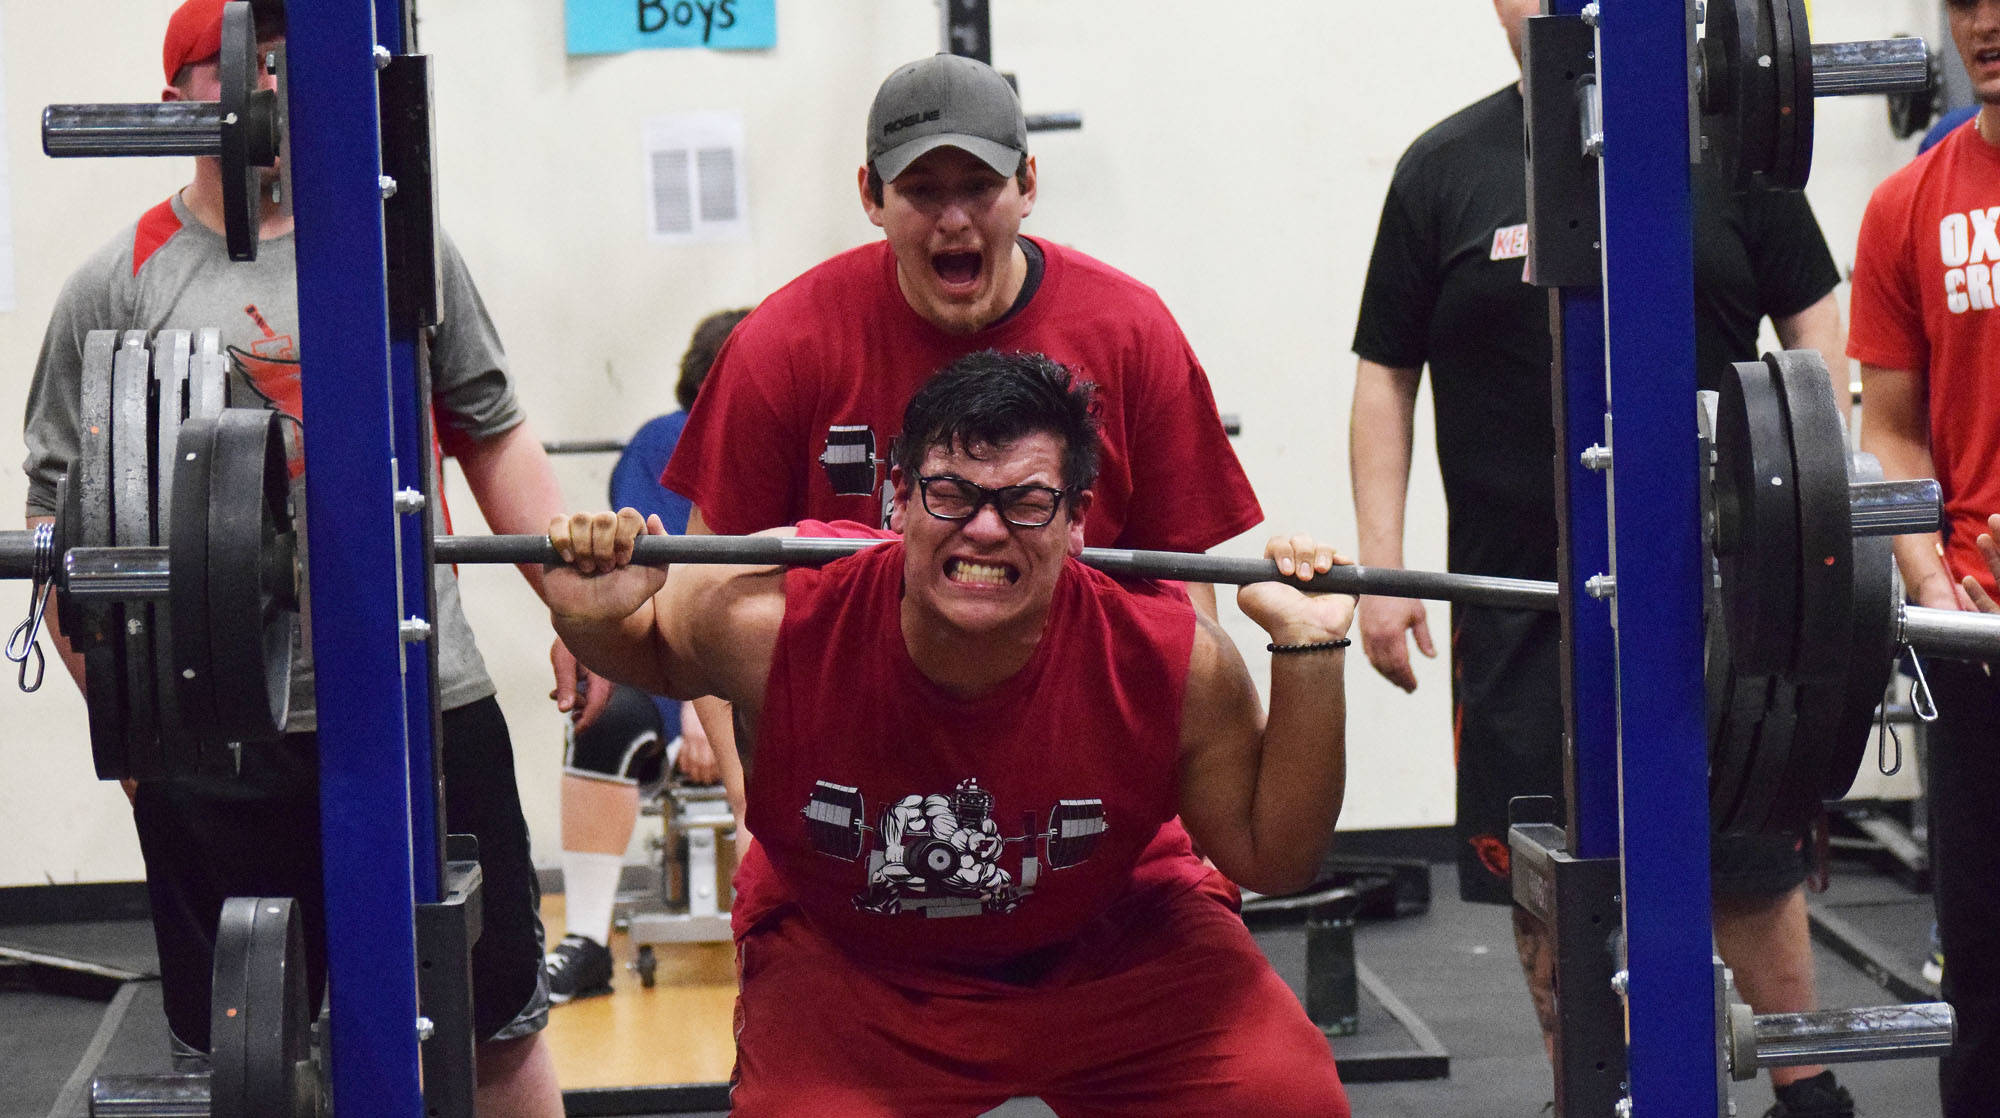 Kenai Central senior Jonathan Delgado attempts to break the 11th-12th grade boys squat record Wednesday evening at the 11th biannual CrossFit Competition at Soldotna High School. (Photo by Joey Klecka/Peninsula Clarion)